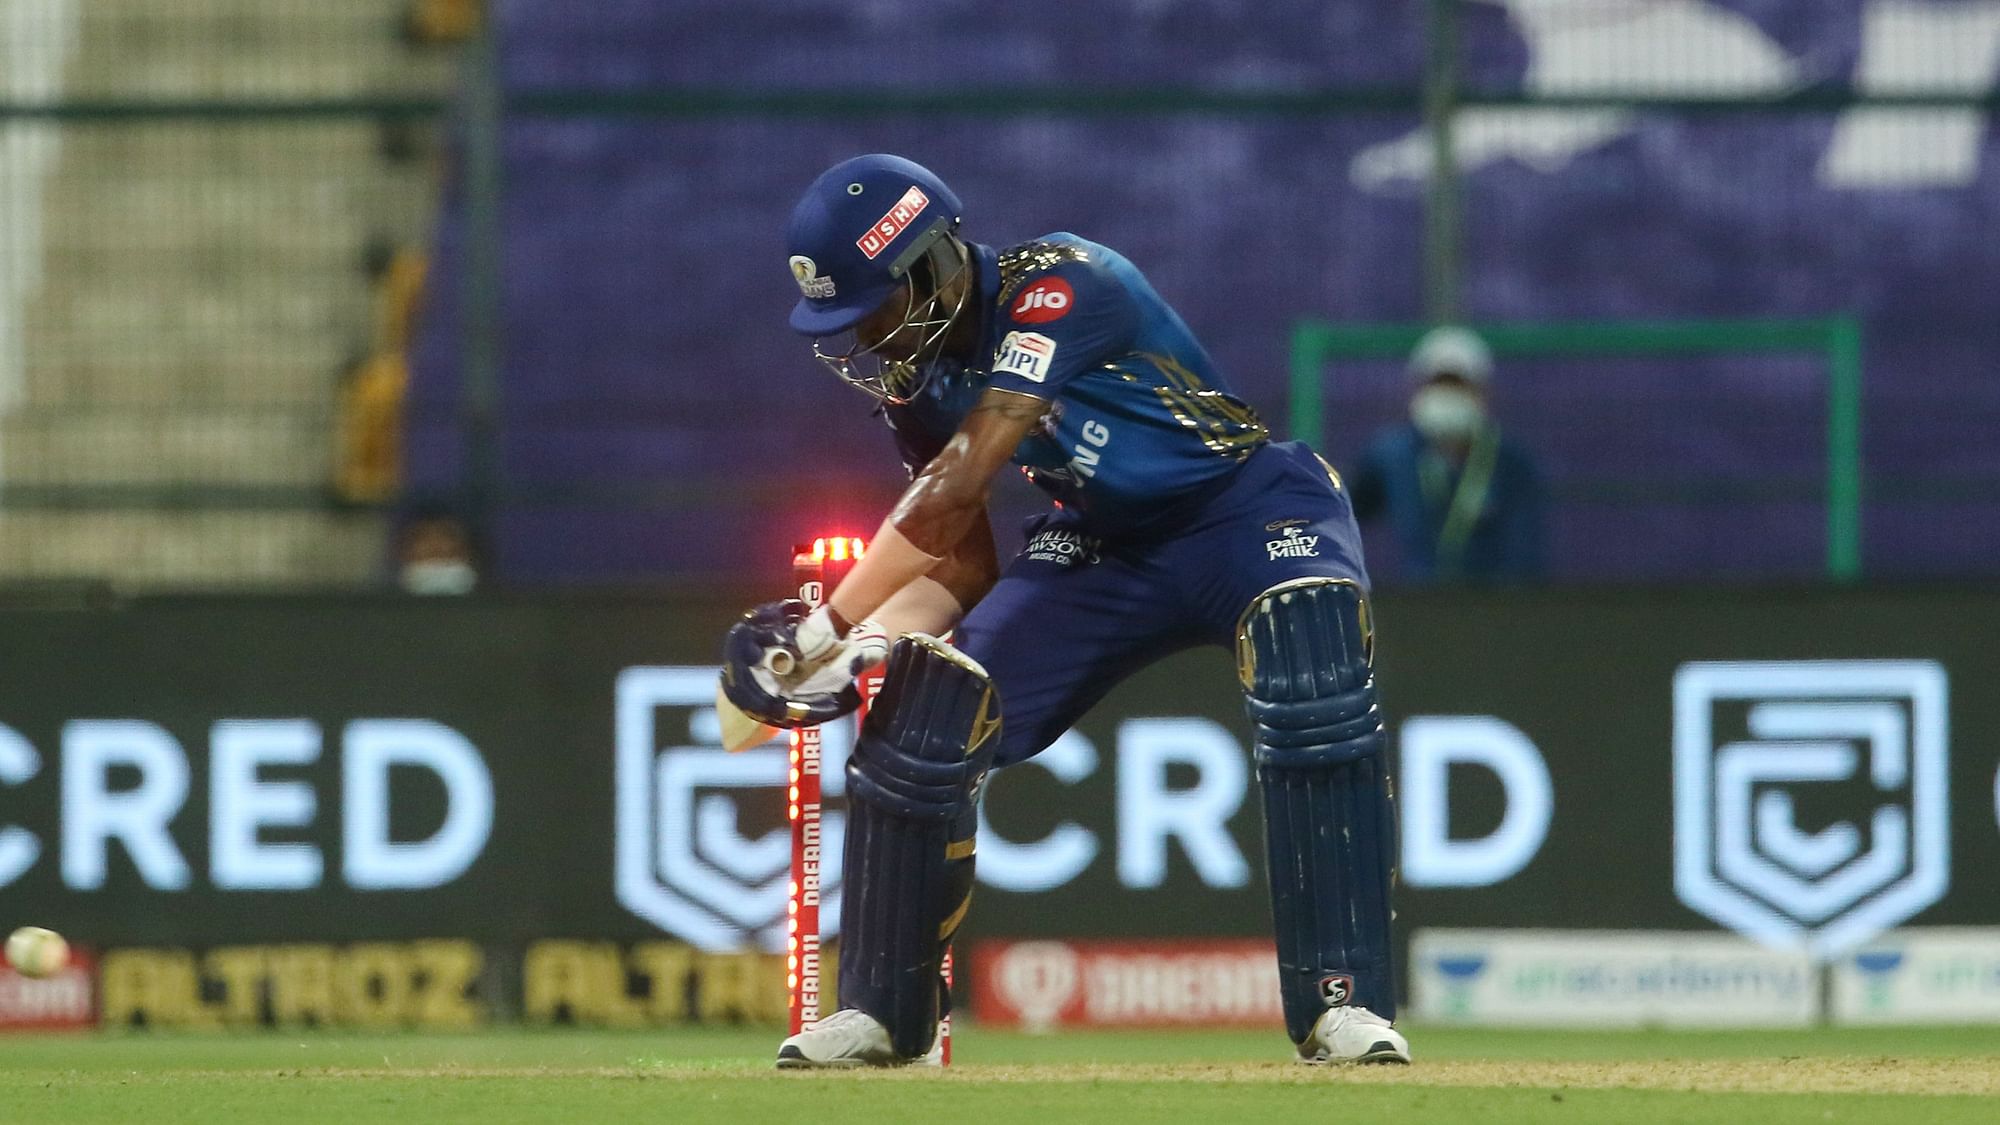 Hardik Pandya of Mumbai Indians gets out as he hits wicket during match 5 of season 13 of the Dream 11 Indian Premier League (IPL) between the Kolkata Knight Riders and the Mumbai Indians held at the Sheikh Zayed Stadium.